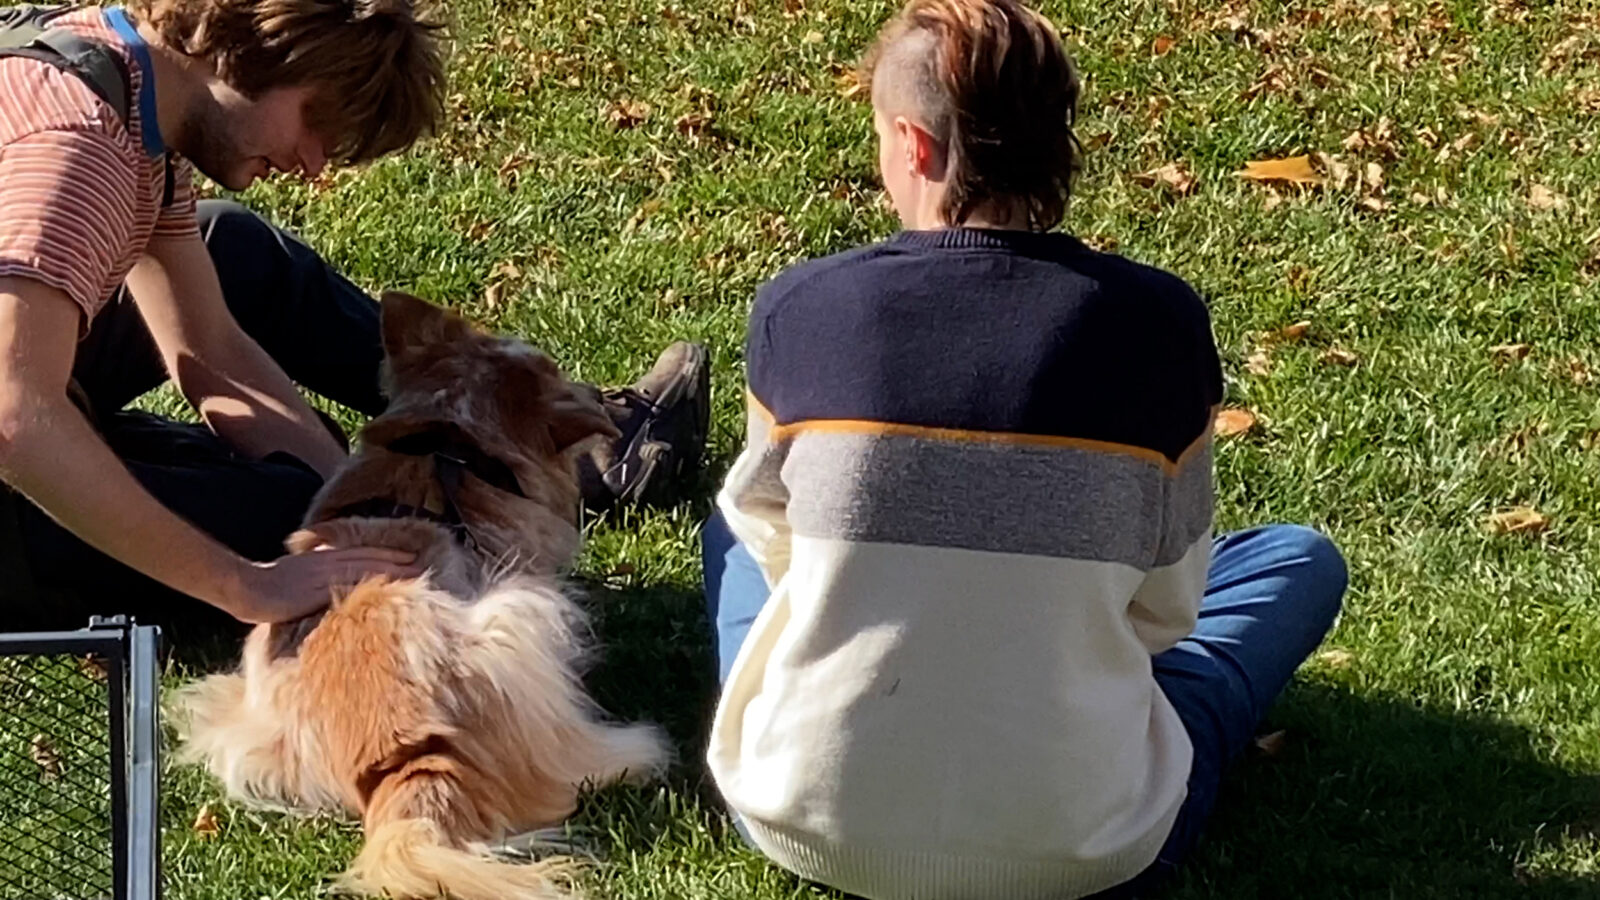 students sit with a dog on the lawn